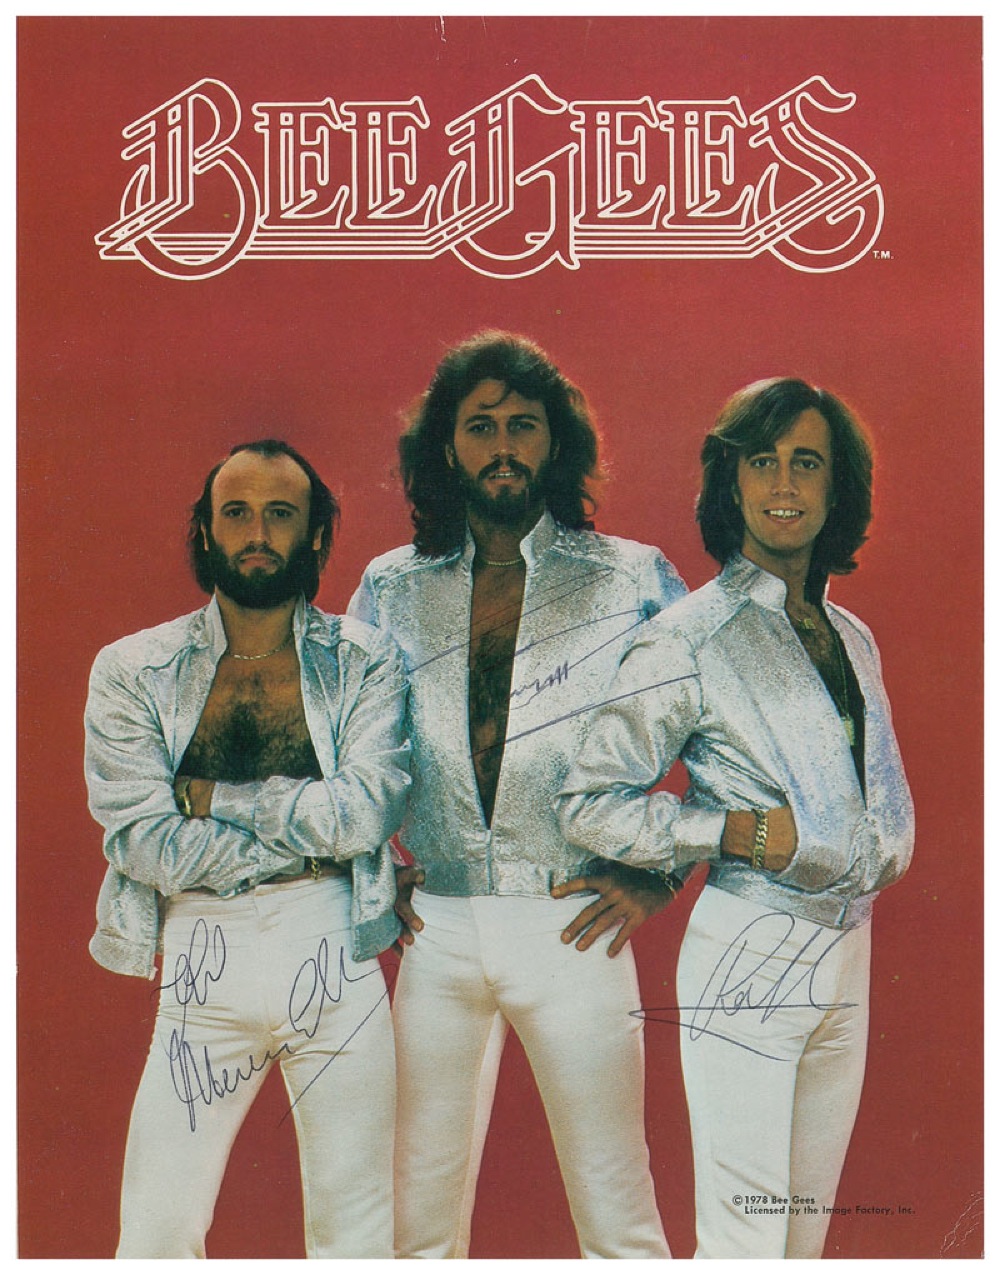 Lot #608 The Bee Gees - Image 1